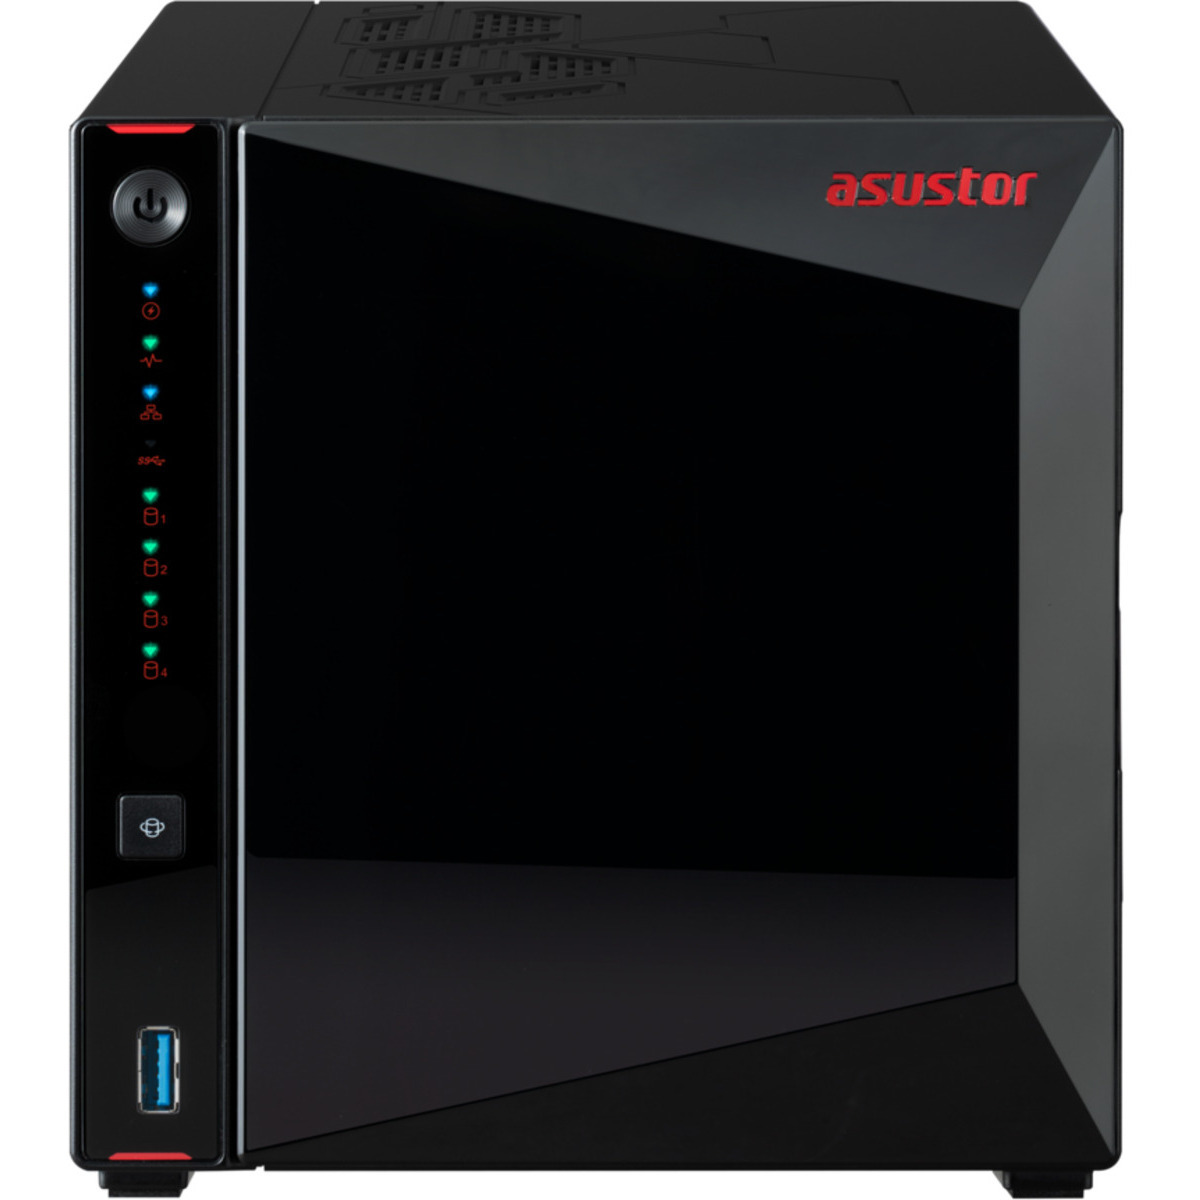 ASUSTOR AS5404T NAS - Network Attached Storage Device Burn-In Tested Configurations - ON SALE - FREE RAM UPGRADE